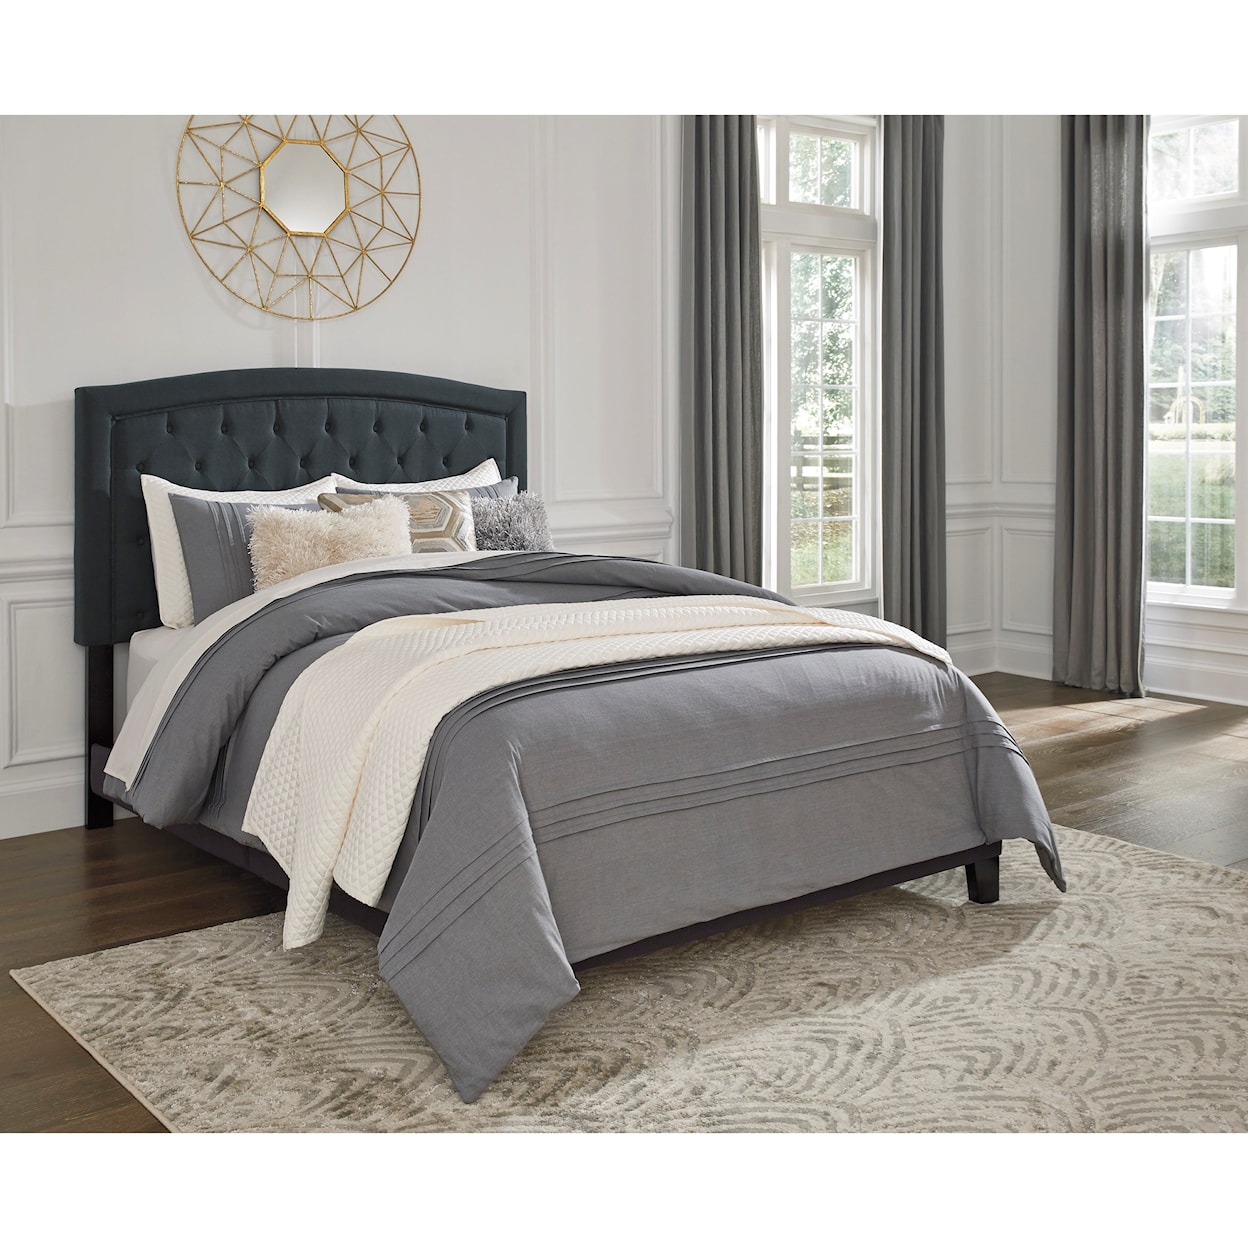 Signature Design by Ashley Adelloni King Upholstered Bed